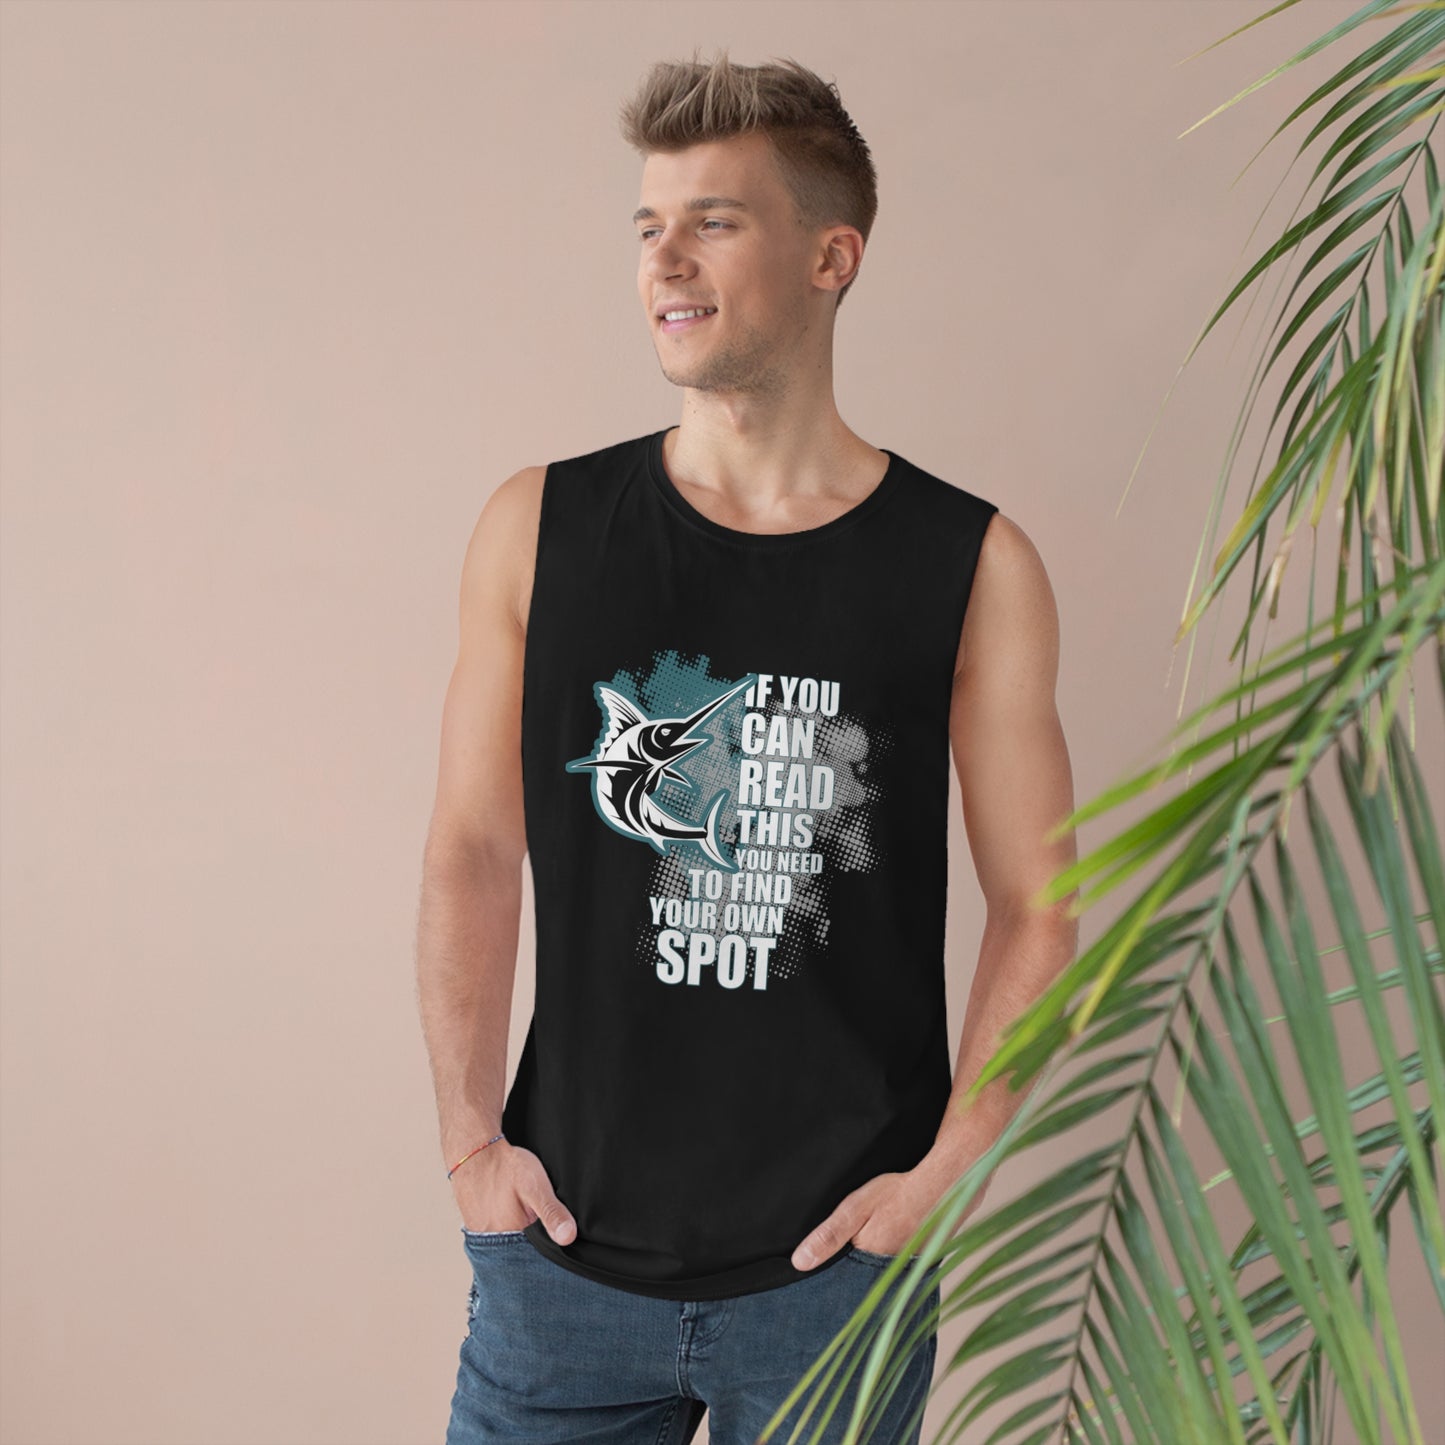 Unisex Barnard Tank - If You Can Read This You Need To Find Your Own Spot